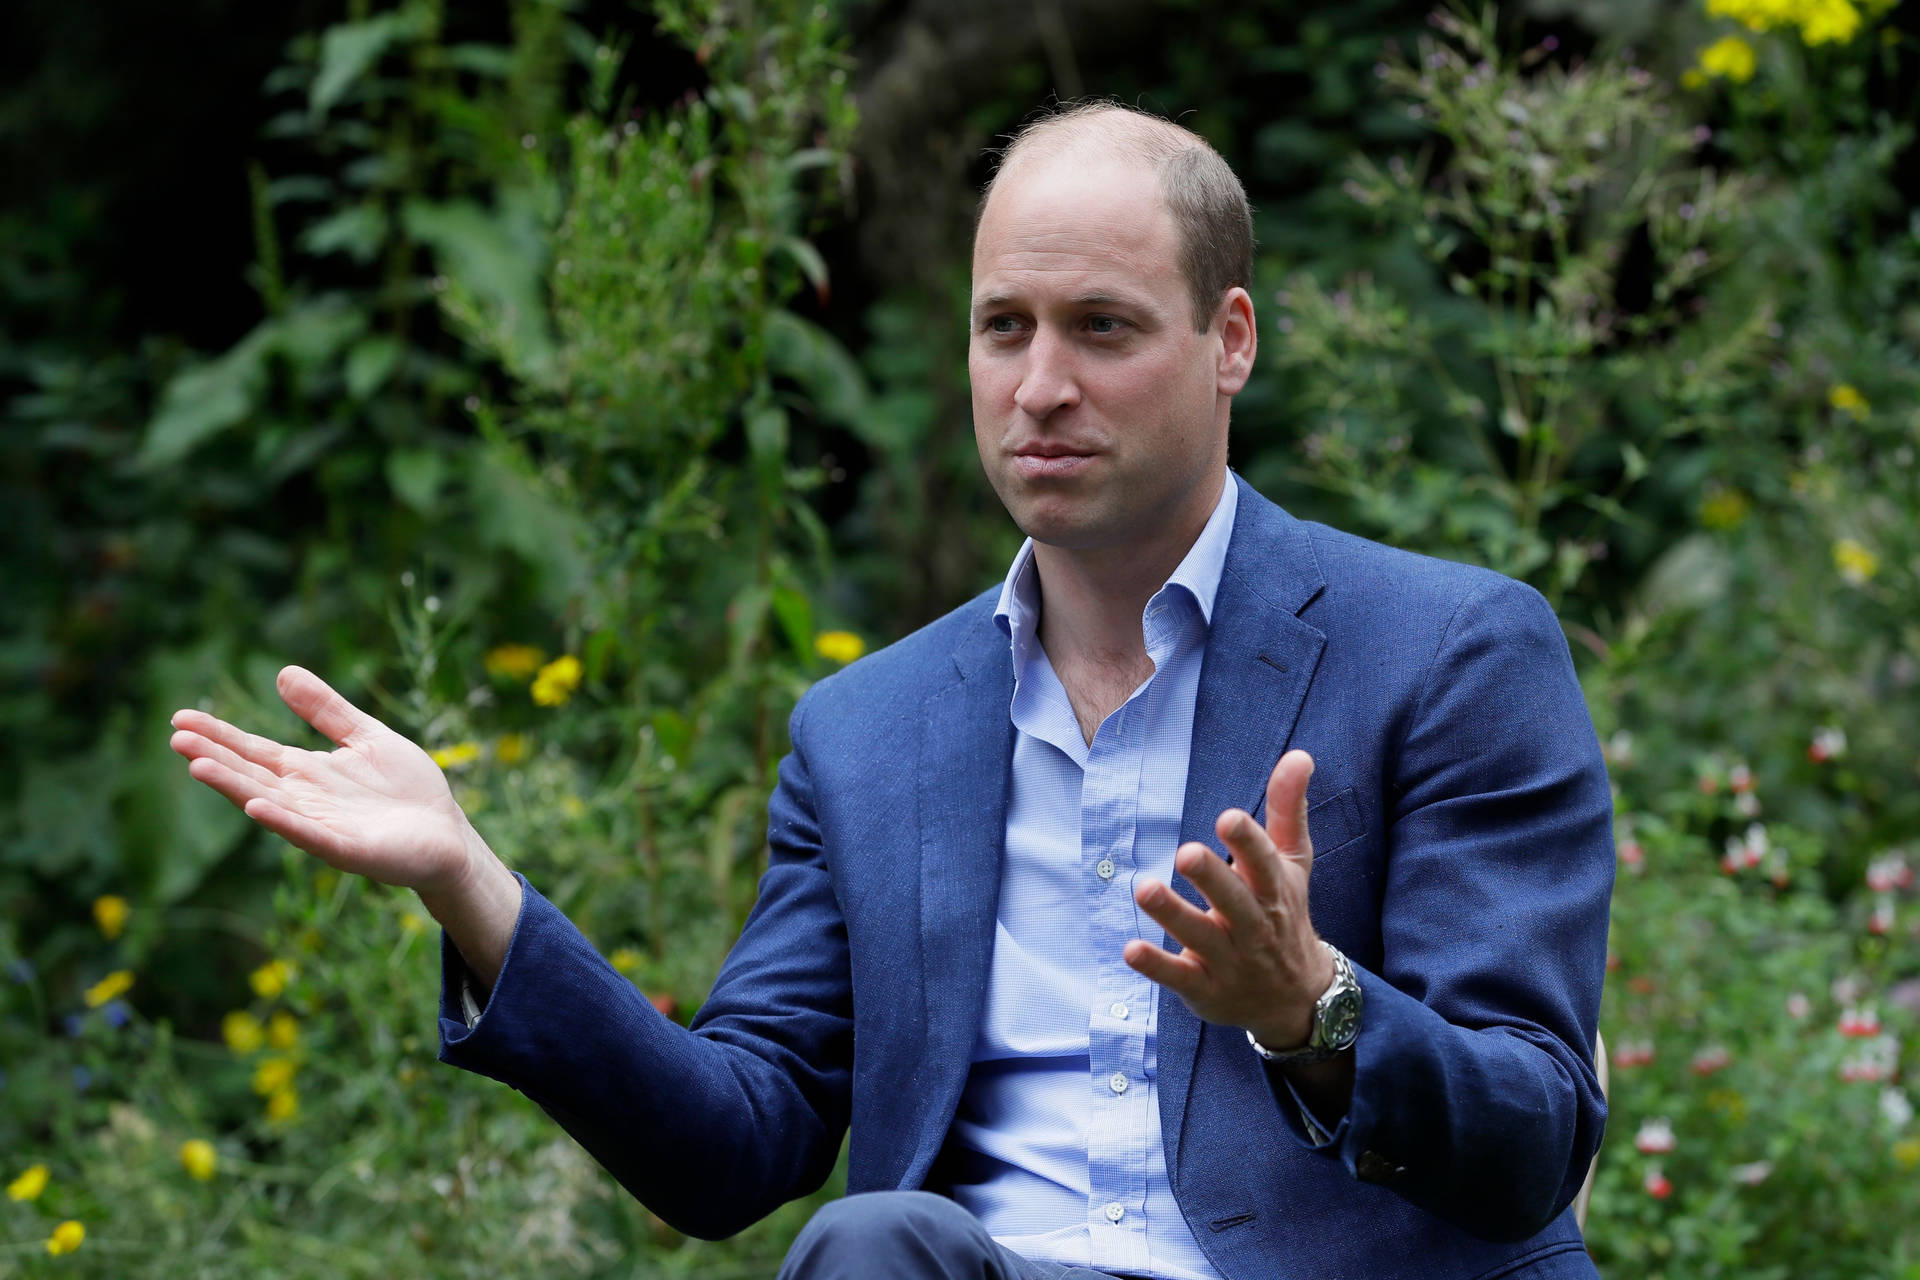 Prince William Gesturing With Hands